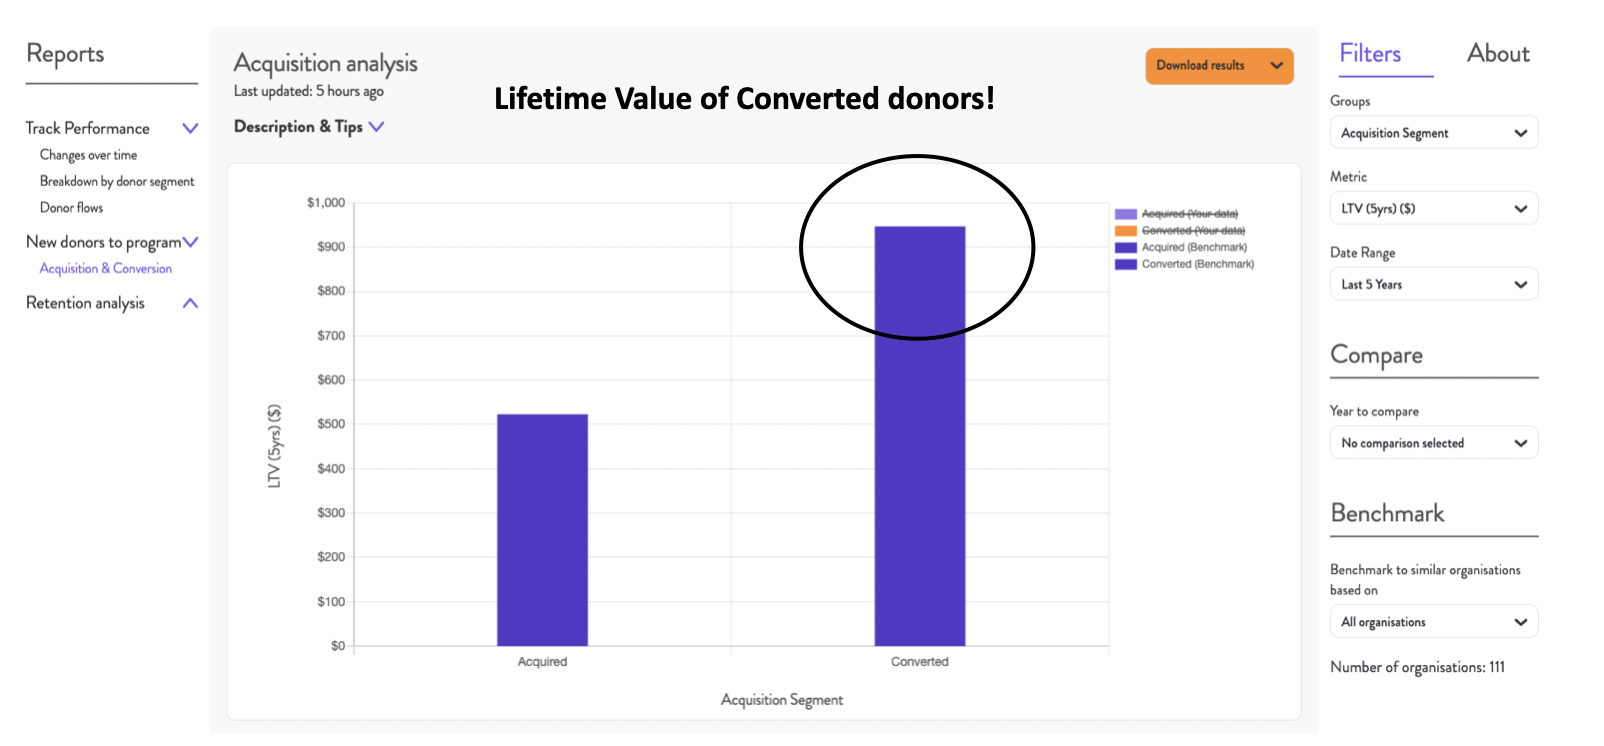 Converted Regular Givers Have 2xHigher LTV Compared to Acquired Regular Givers